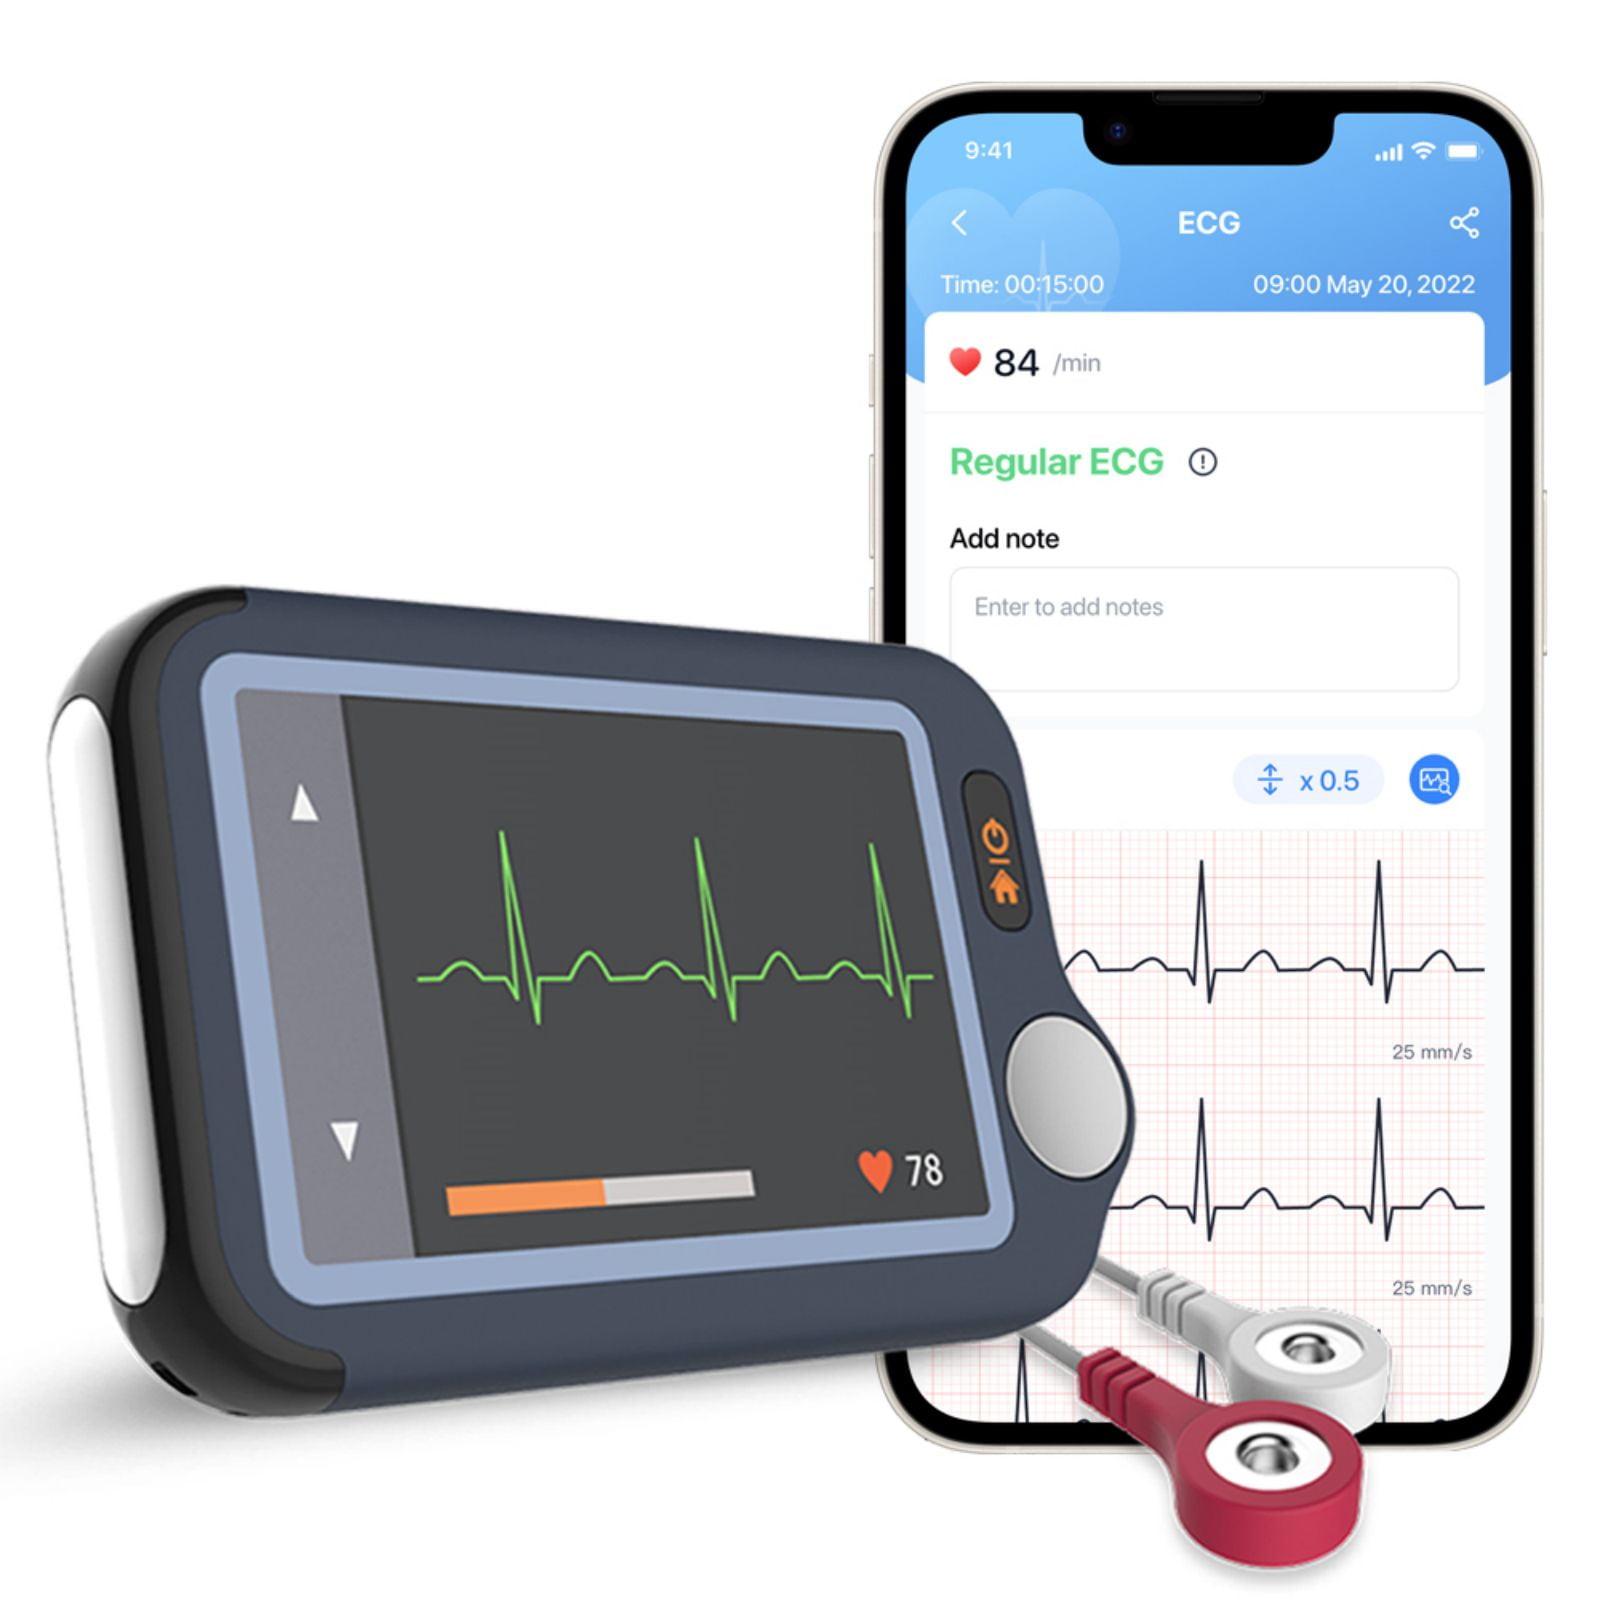 Remote ECG monitoring devices for cardiac health